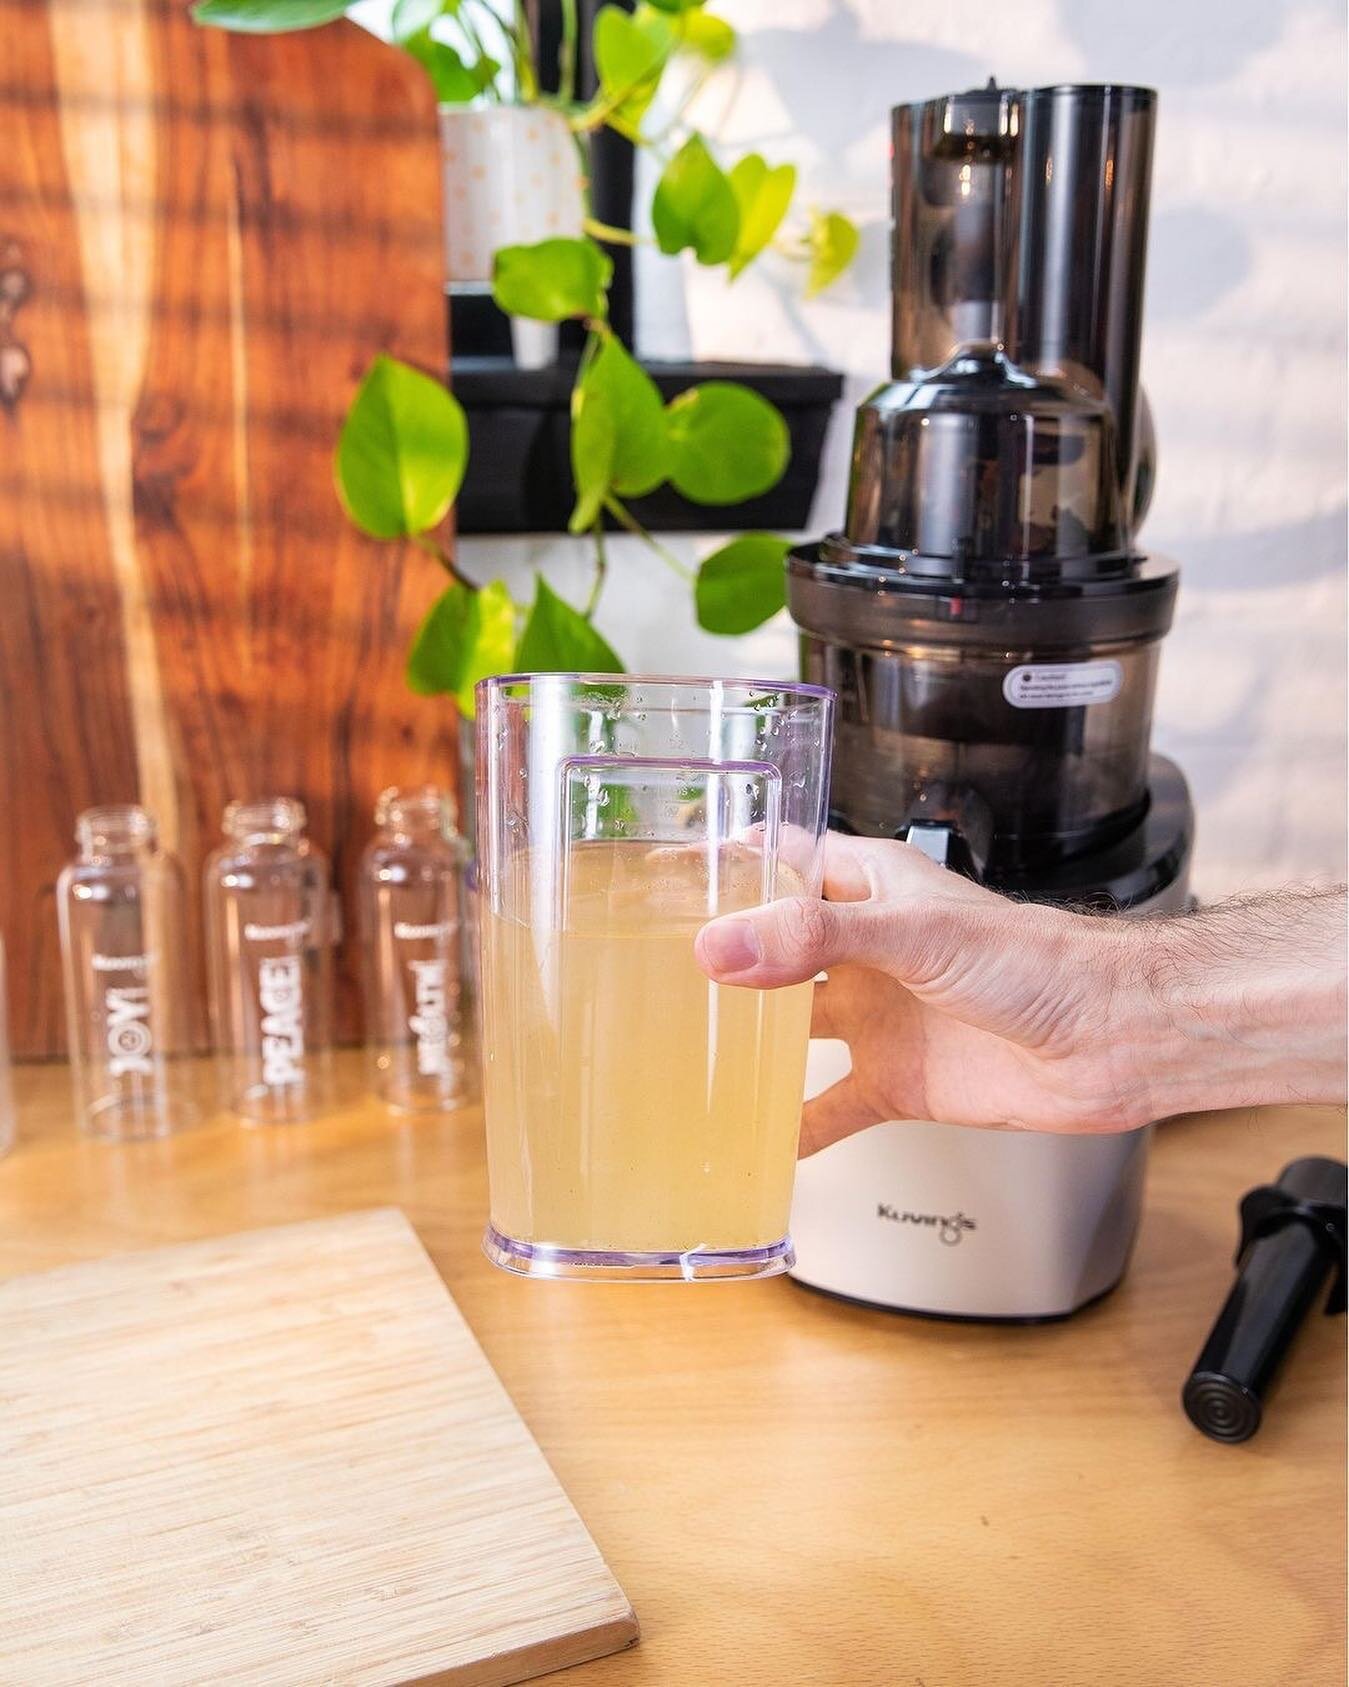 Kuvings Top Tip: Flush your juicer with clean water to help push the pulp out and give it a pre-rinse.

Of course, you can also use the flushed-out water. We&rsquo;ll show you how, keep your eyes peeled! 
#kuvingsnz #tastethedifference #revo830 #juic